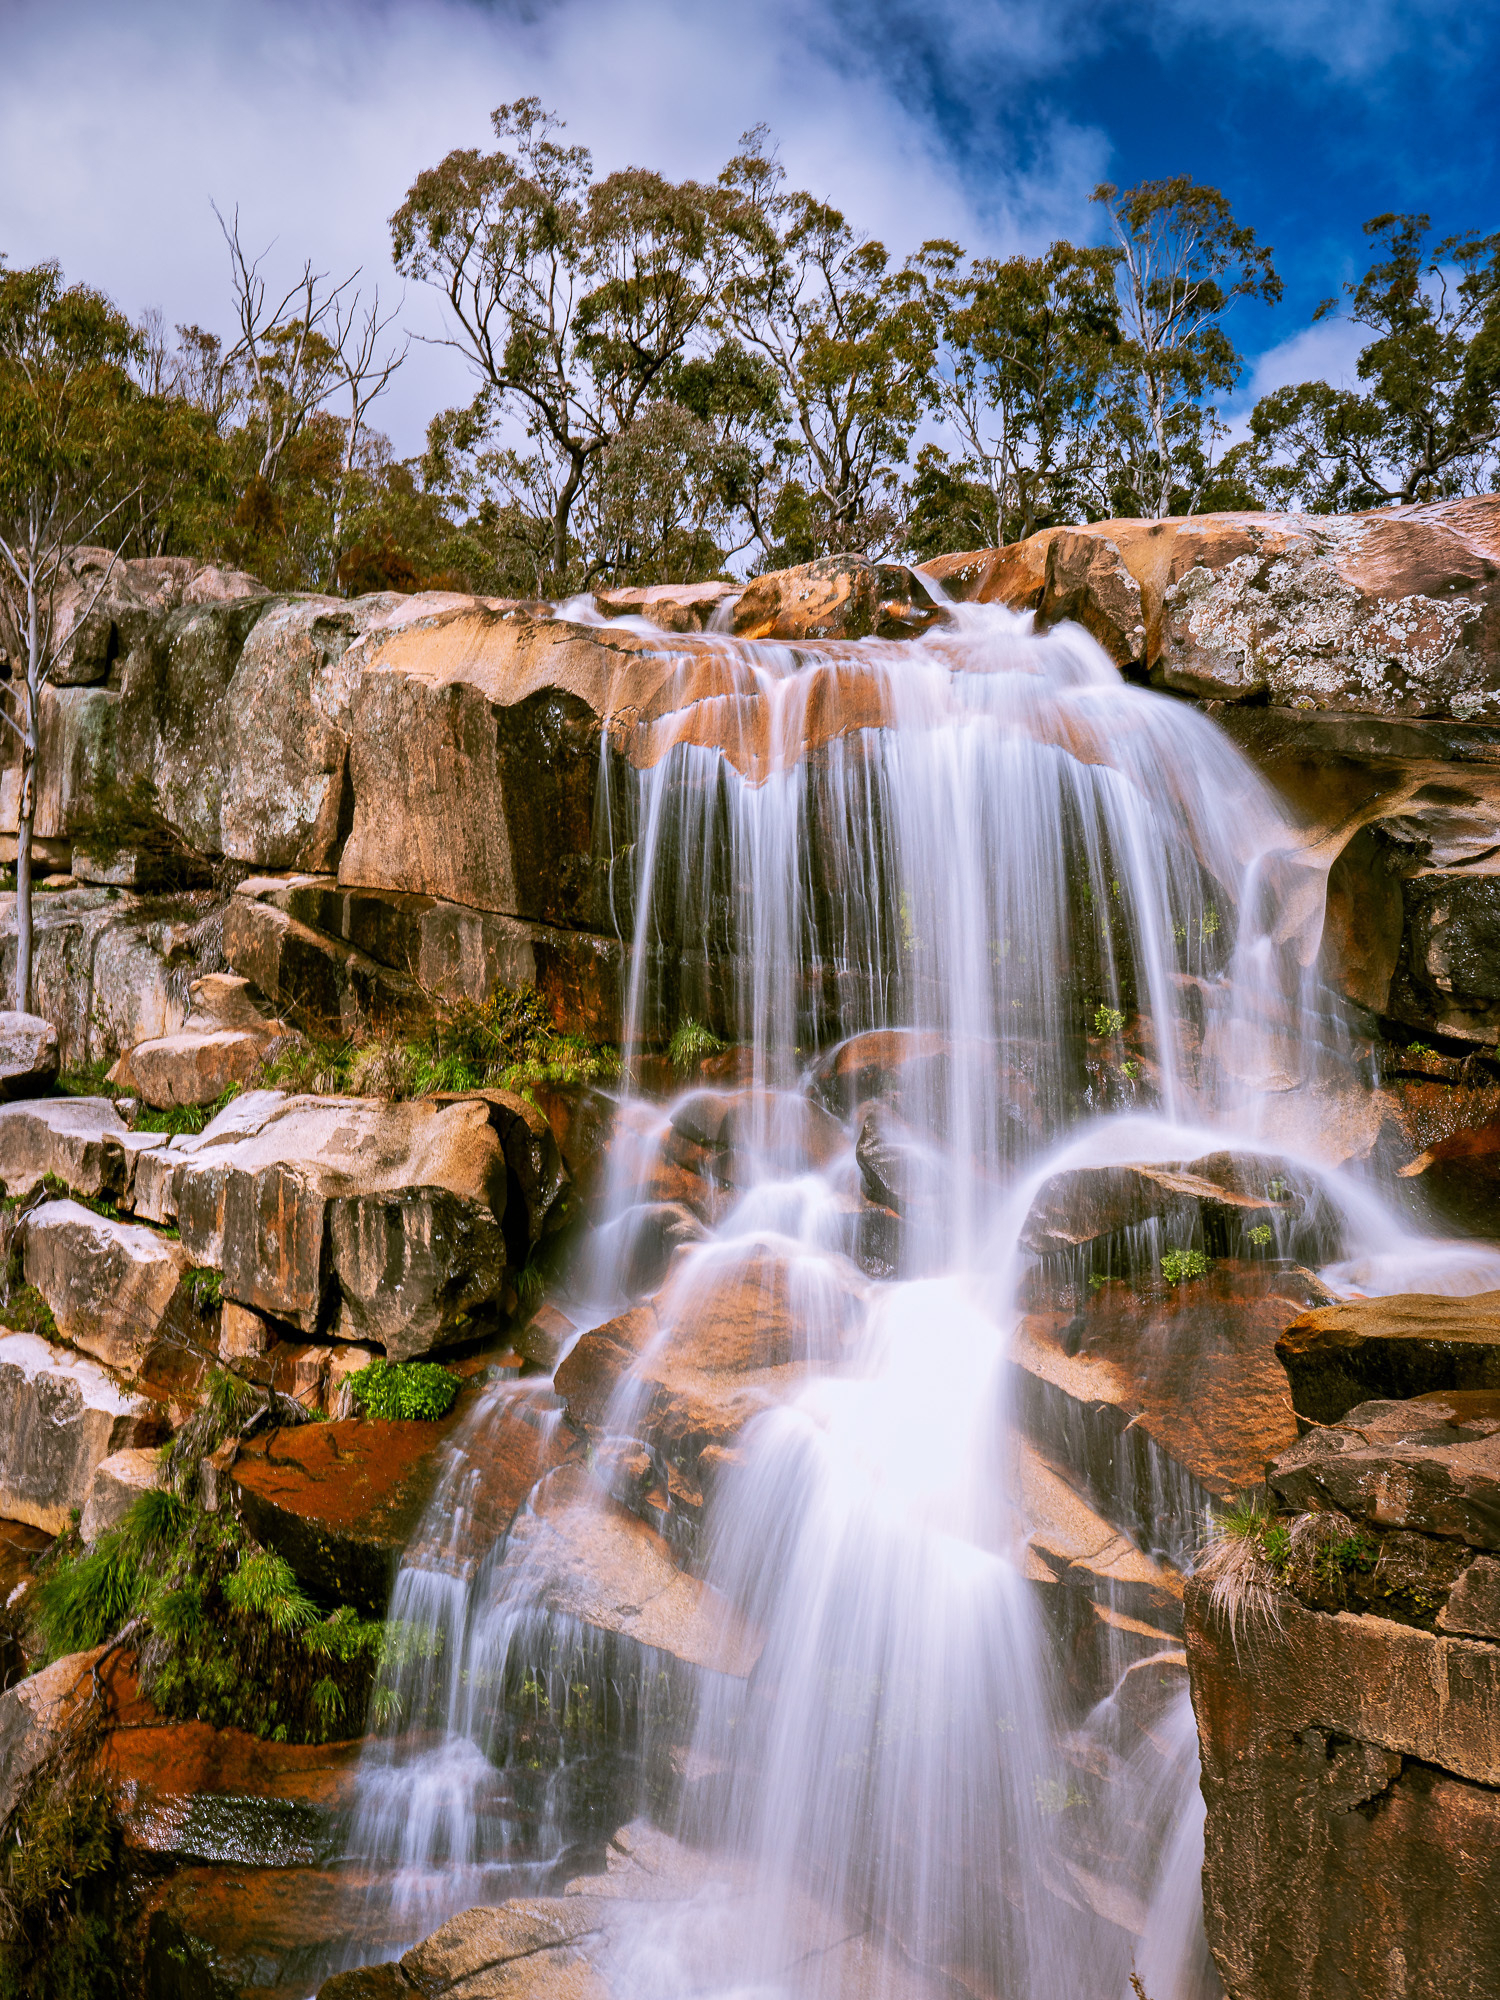 Image of the Gibraltar Falls waterfall near Canberra, Australia